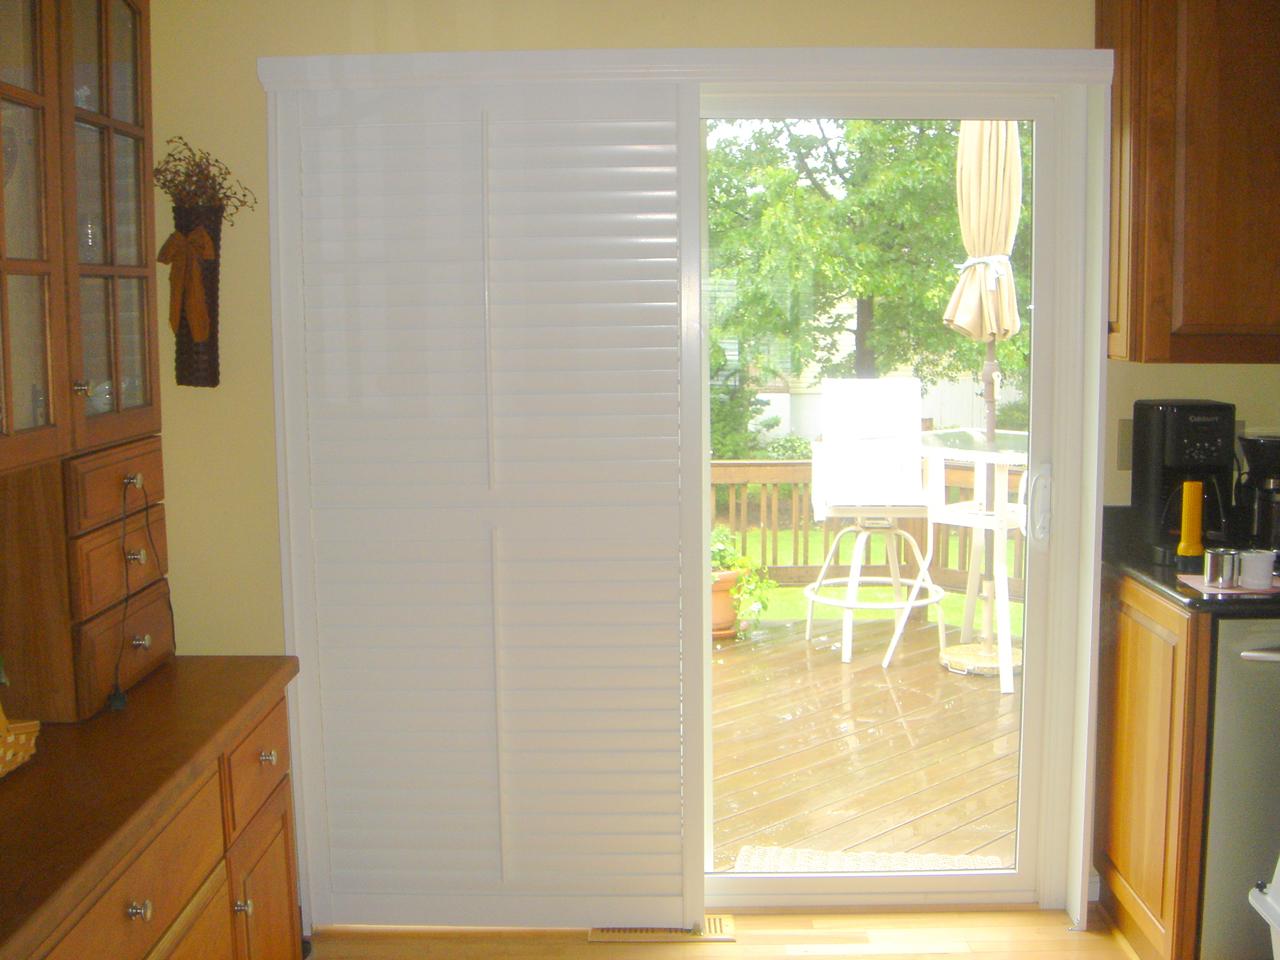 Bypass shutters on sliding glass door with the louvers closed and part of the shutters to the side